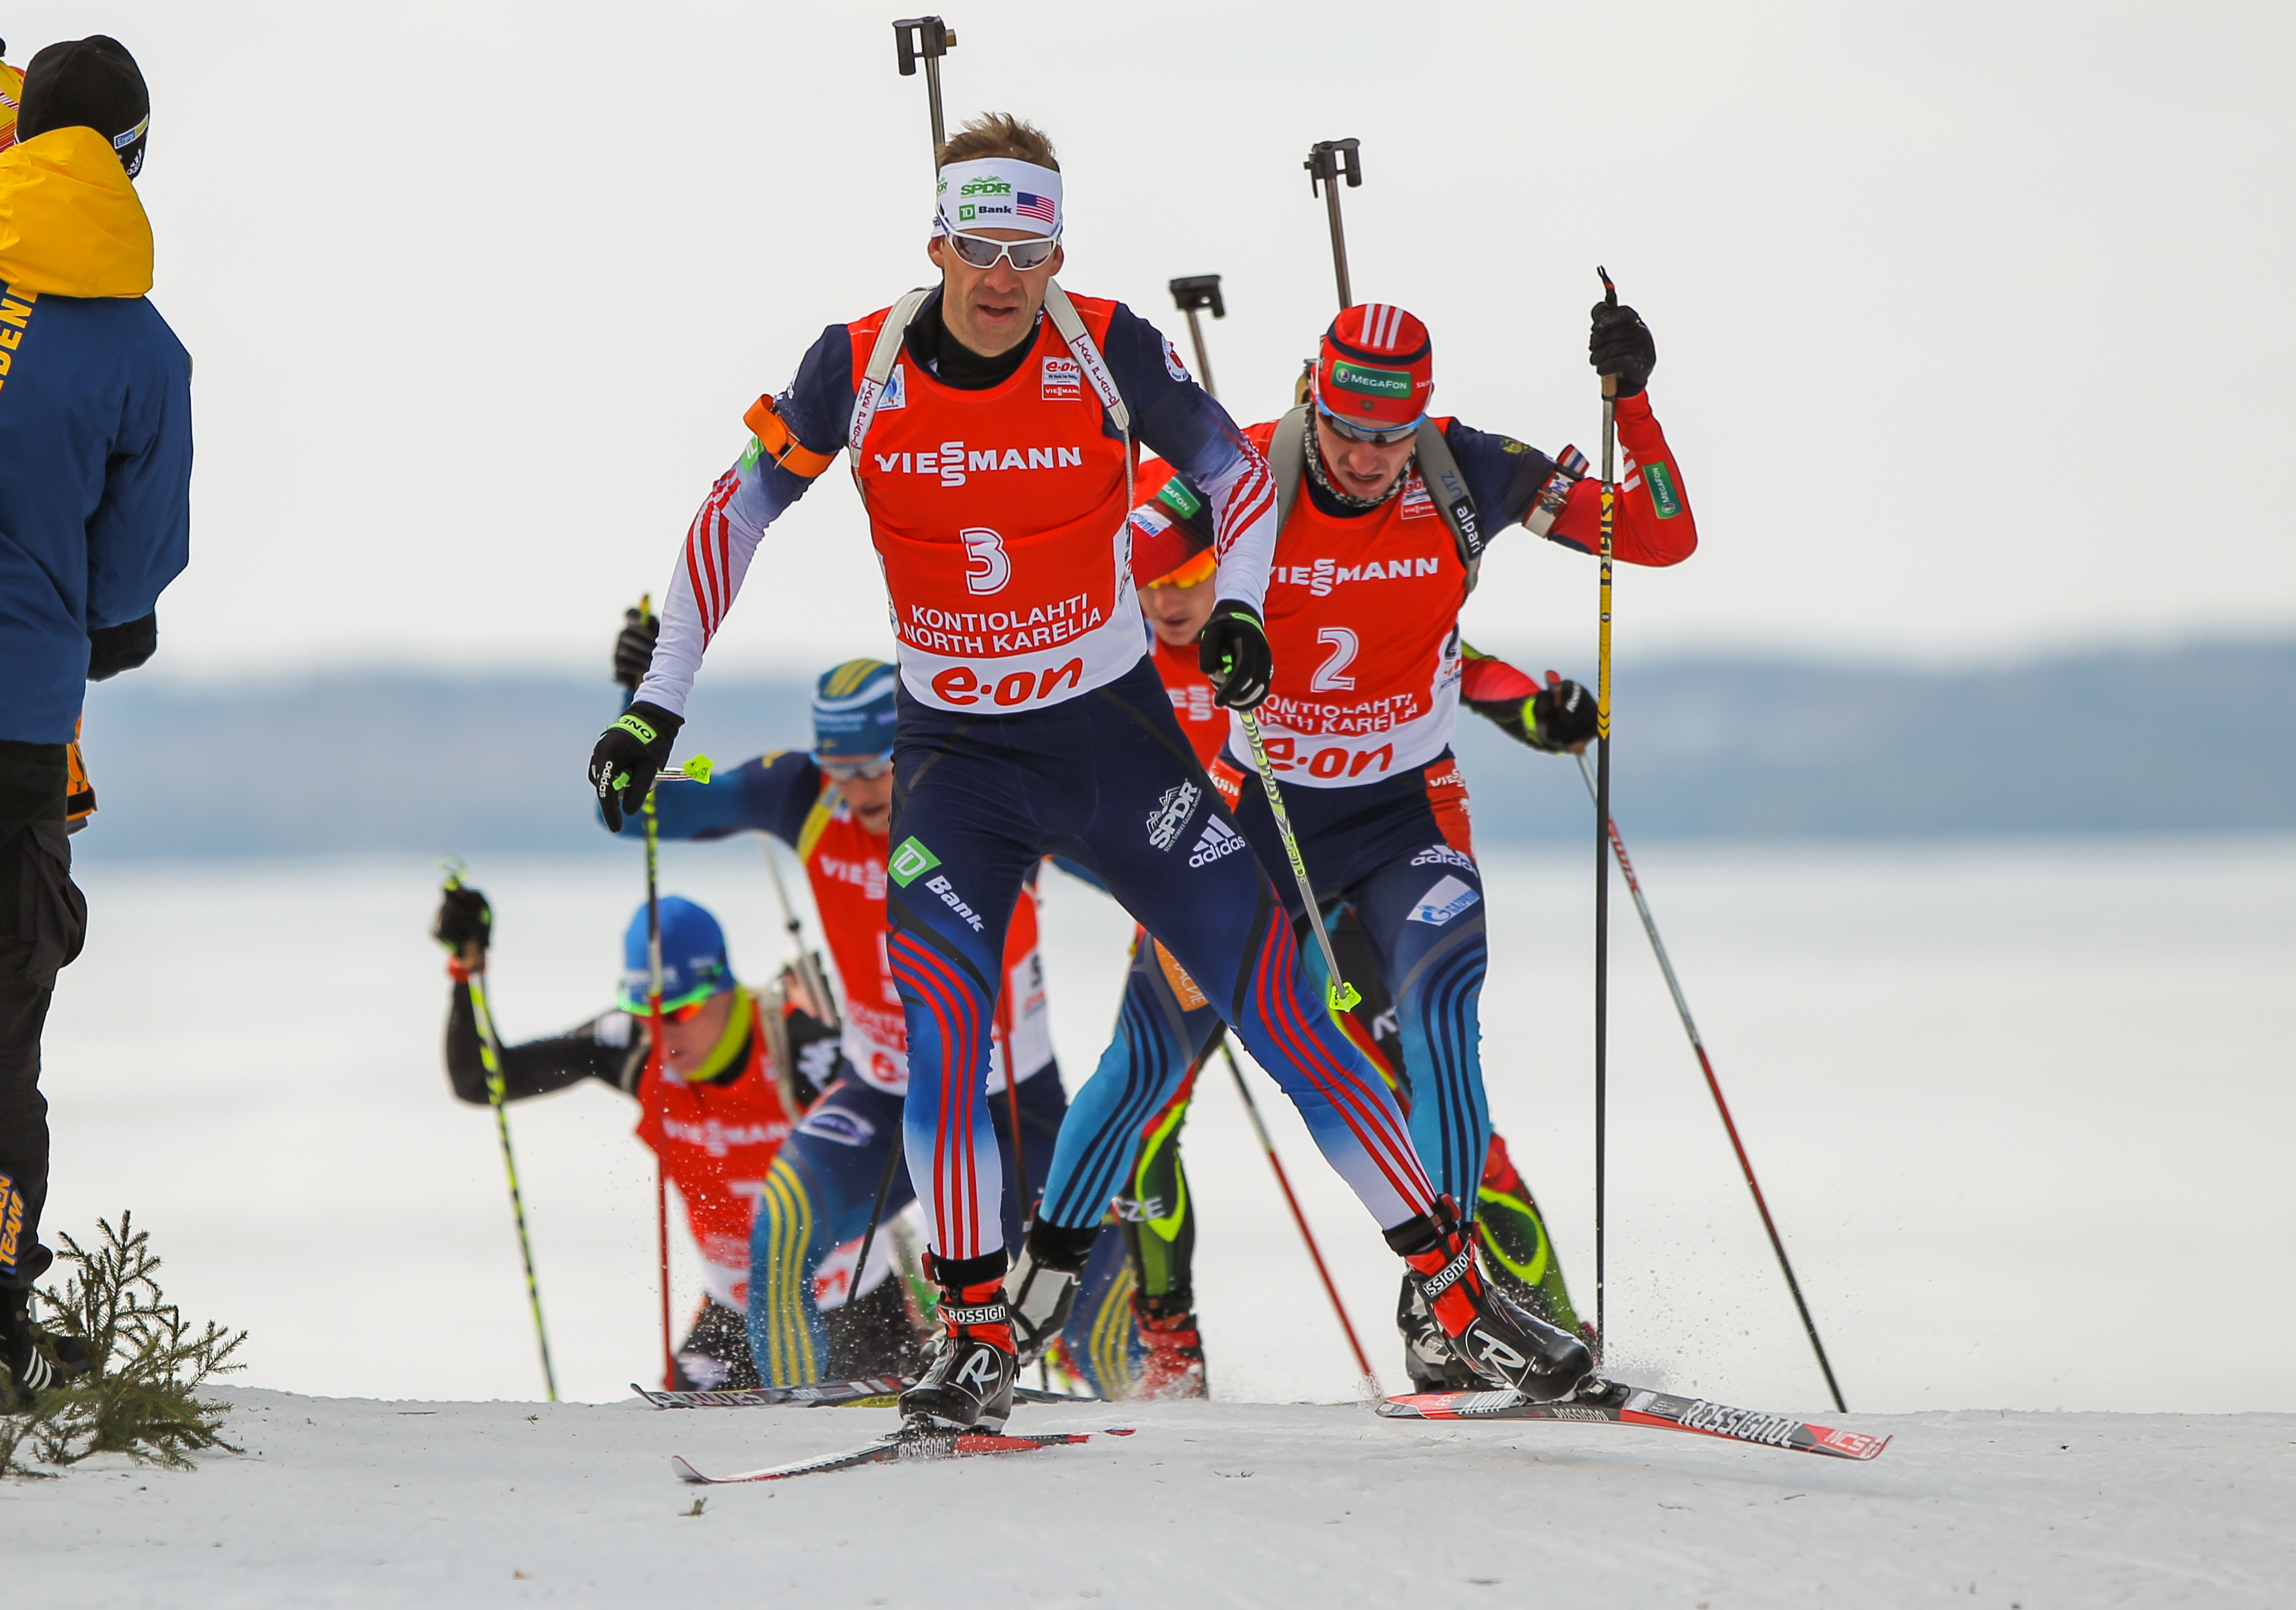 Lowell Bailey (USA) leading Alexander Loginov of Russia in last season's World Cup pursuit in Kontiolahti, Finland. In the sprint, Loginov had placed second and Bailey third; a previous sample of Loginov's has tested positive for EPO. (Photo: USBA/NordicFocus.)